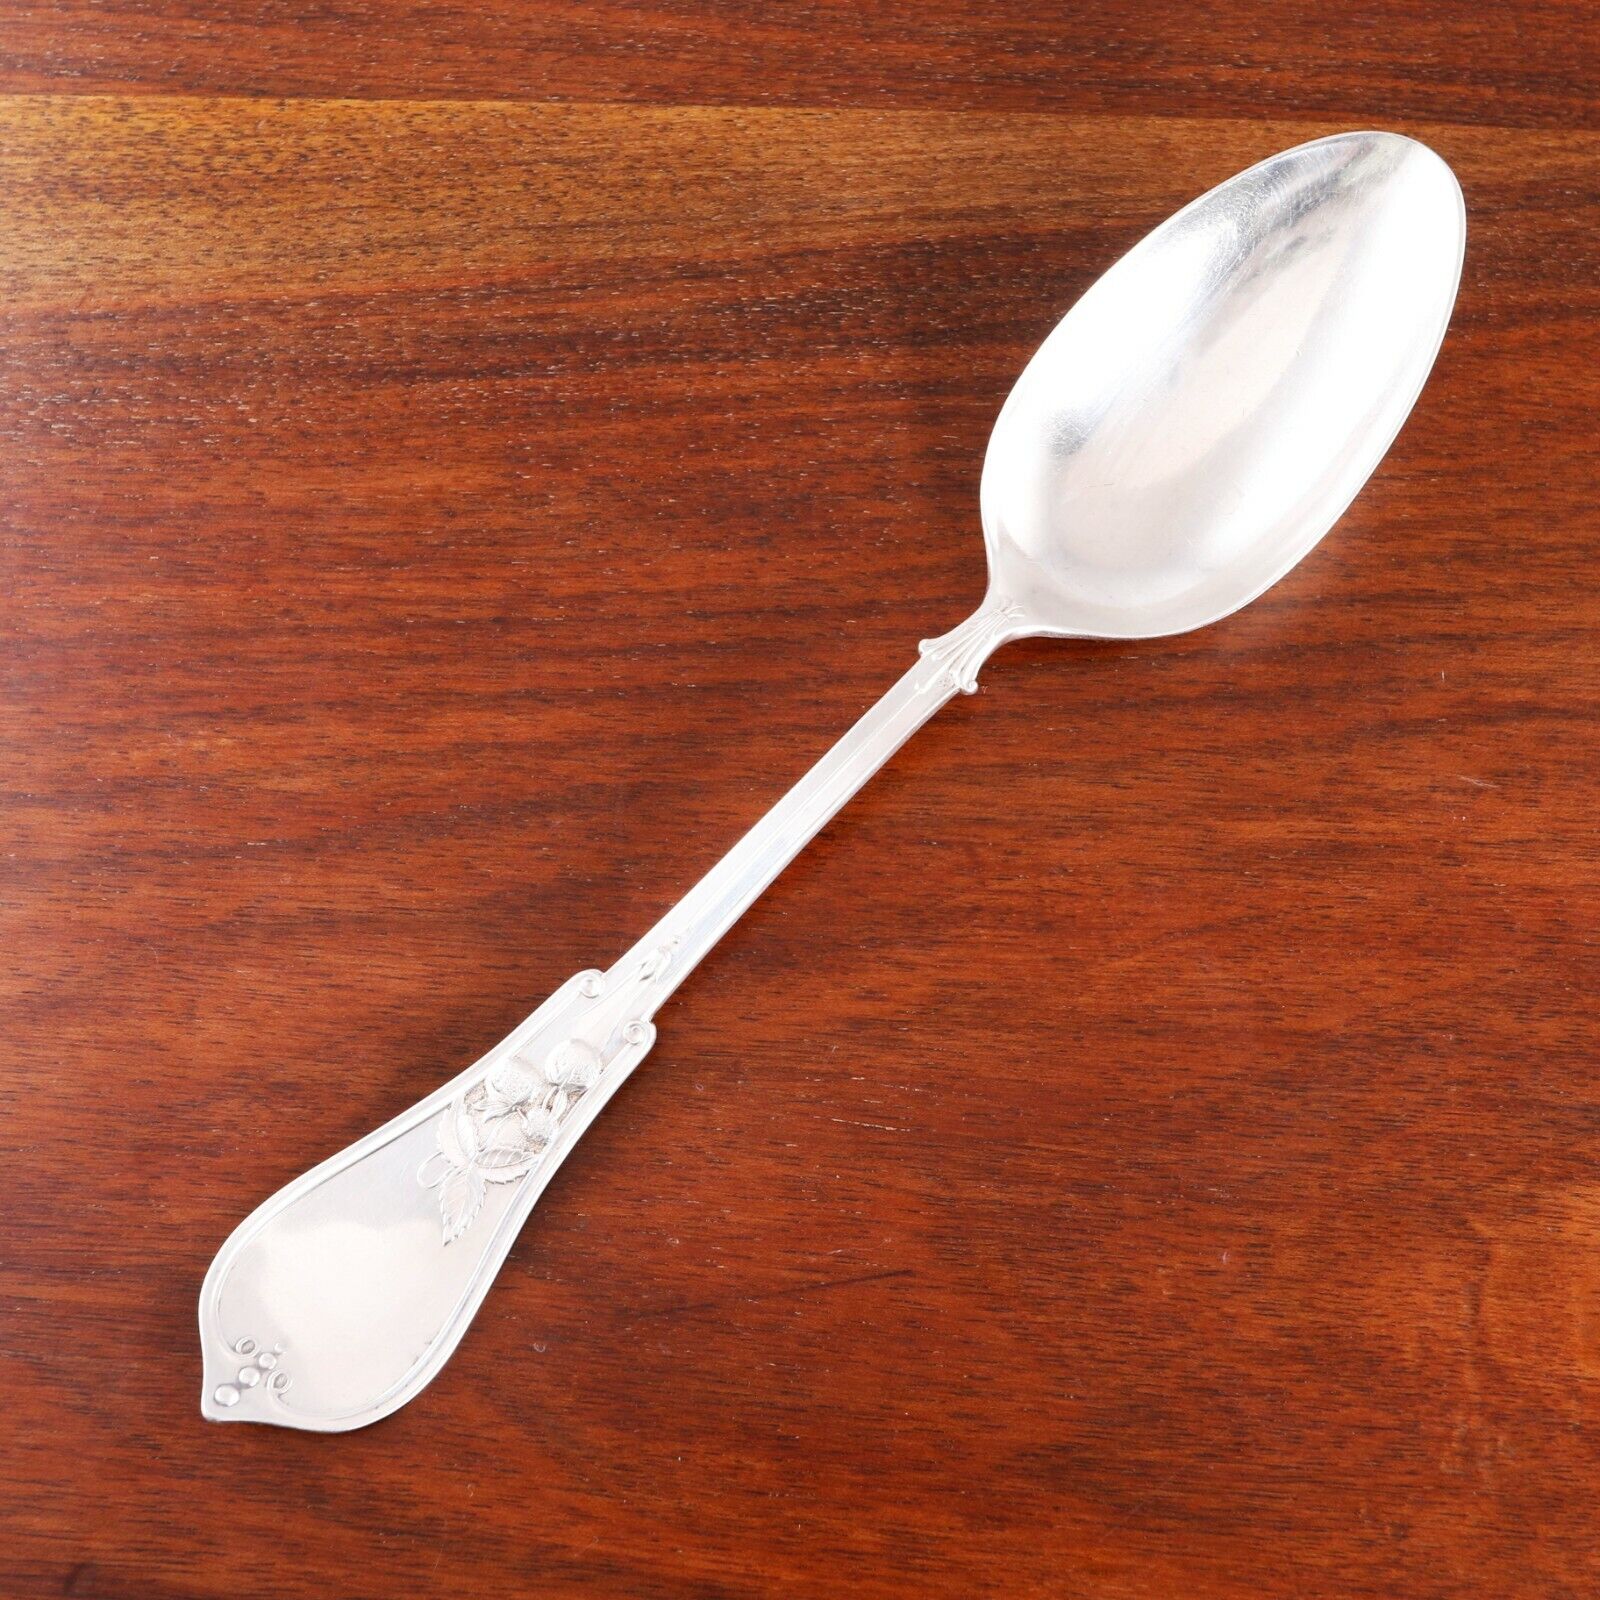 Antique Valuations: ALEXANDER STOWELL AESTHETIC STERLING SILVER SERVING SPOON STRAWBERRY 1865-1904